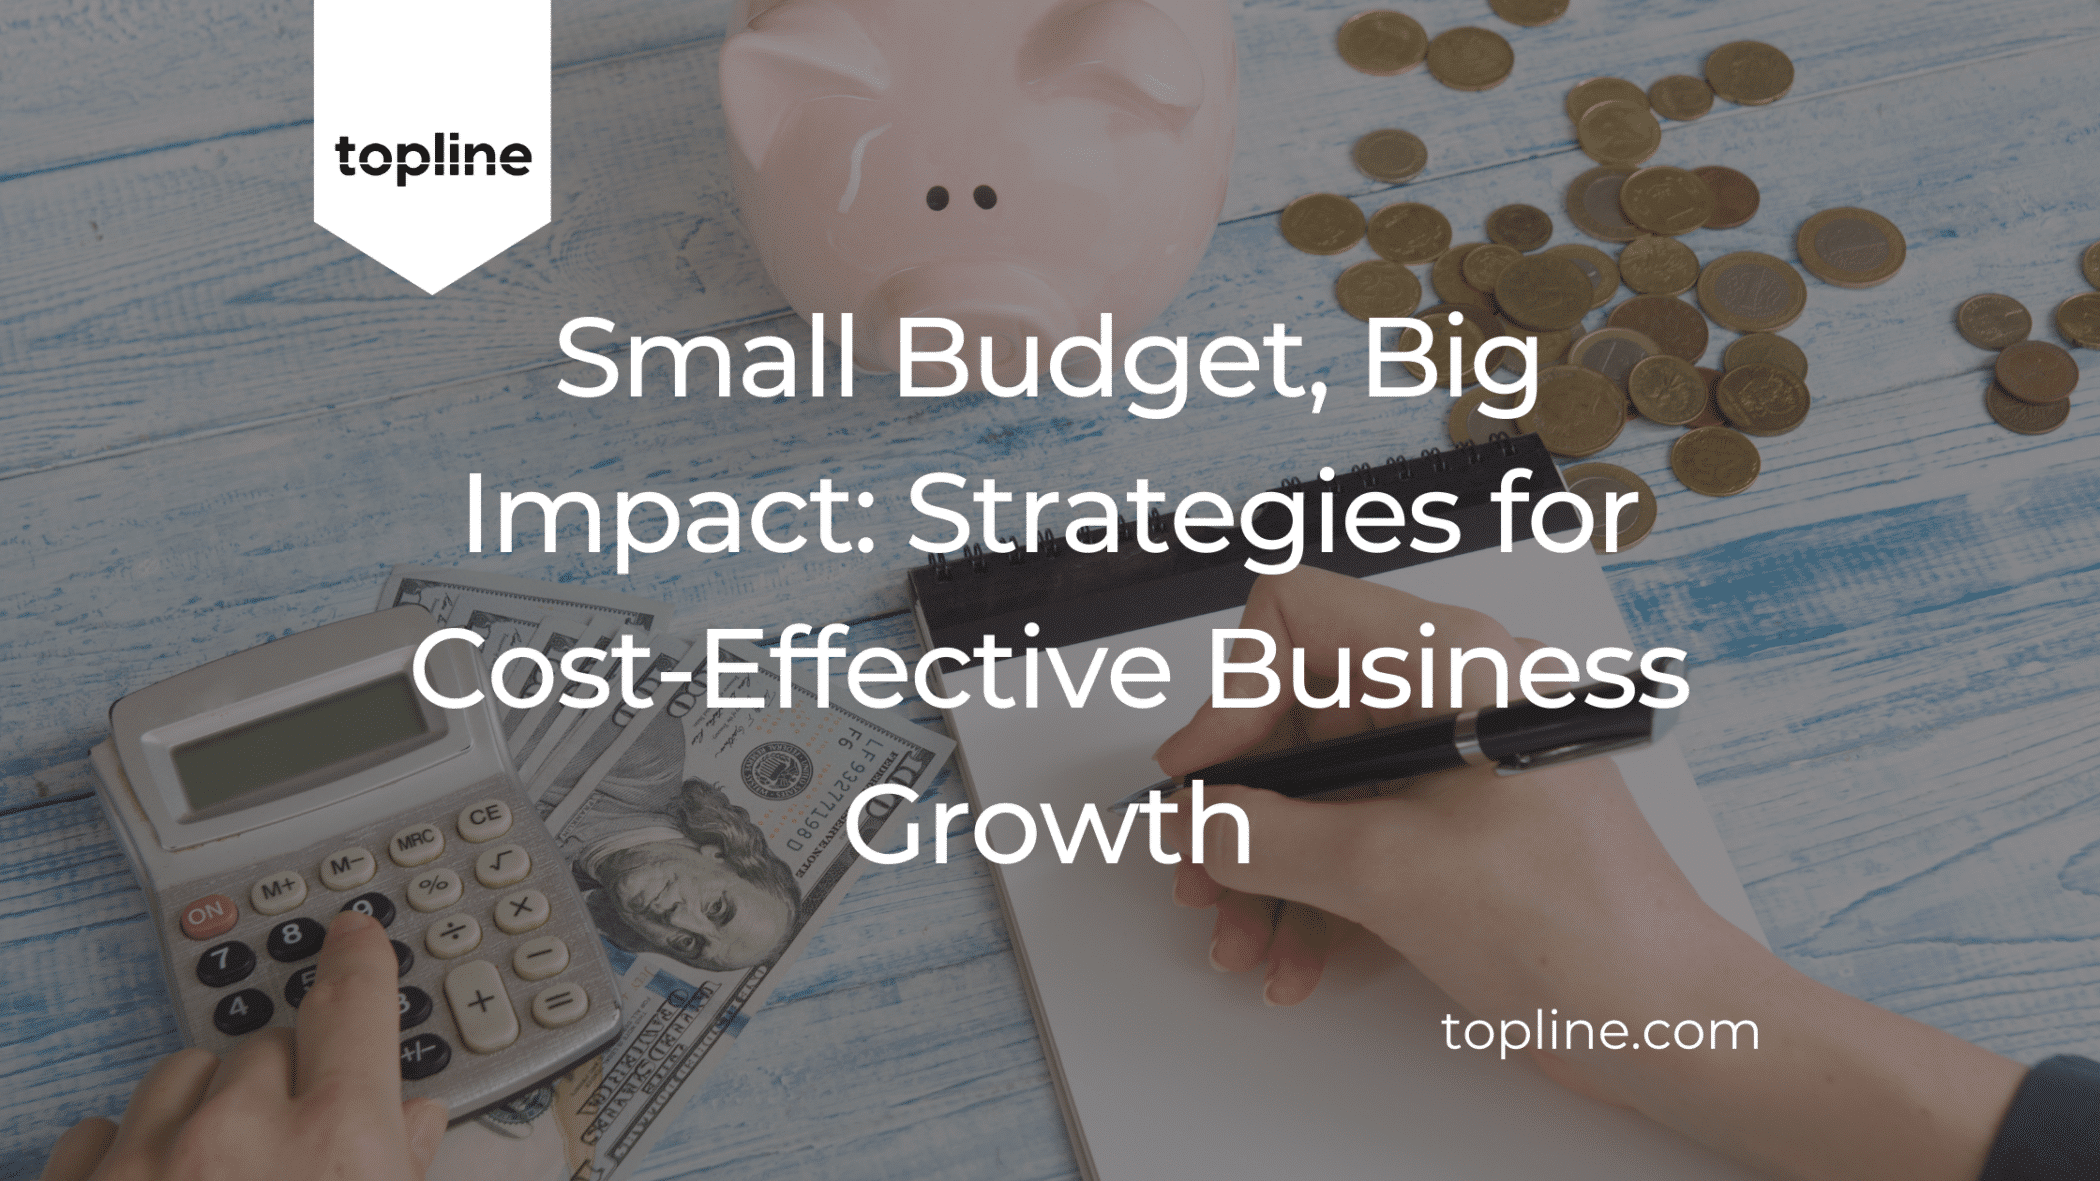 Small Budget, Big Impact: Strategies for Cost-Effective Business Growth